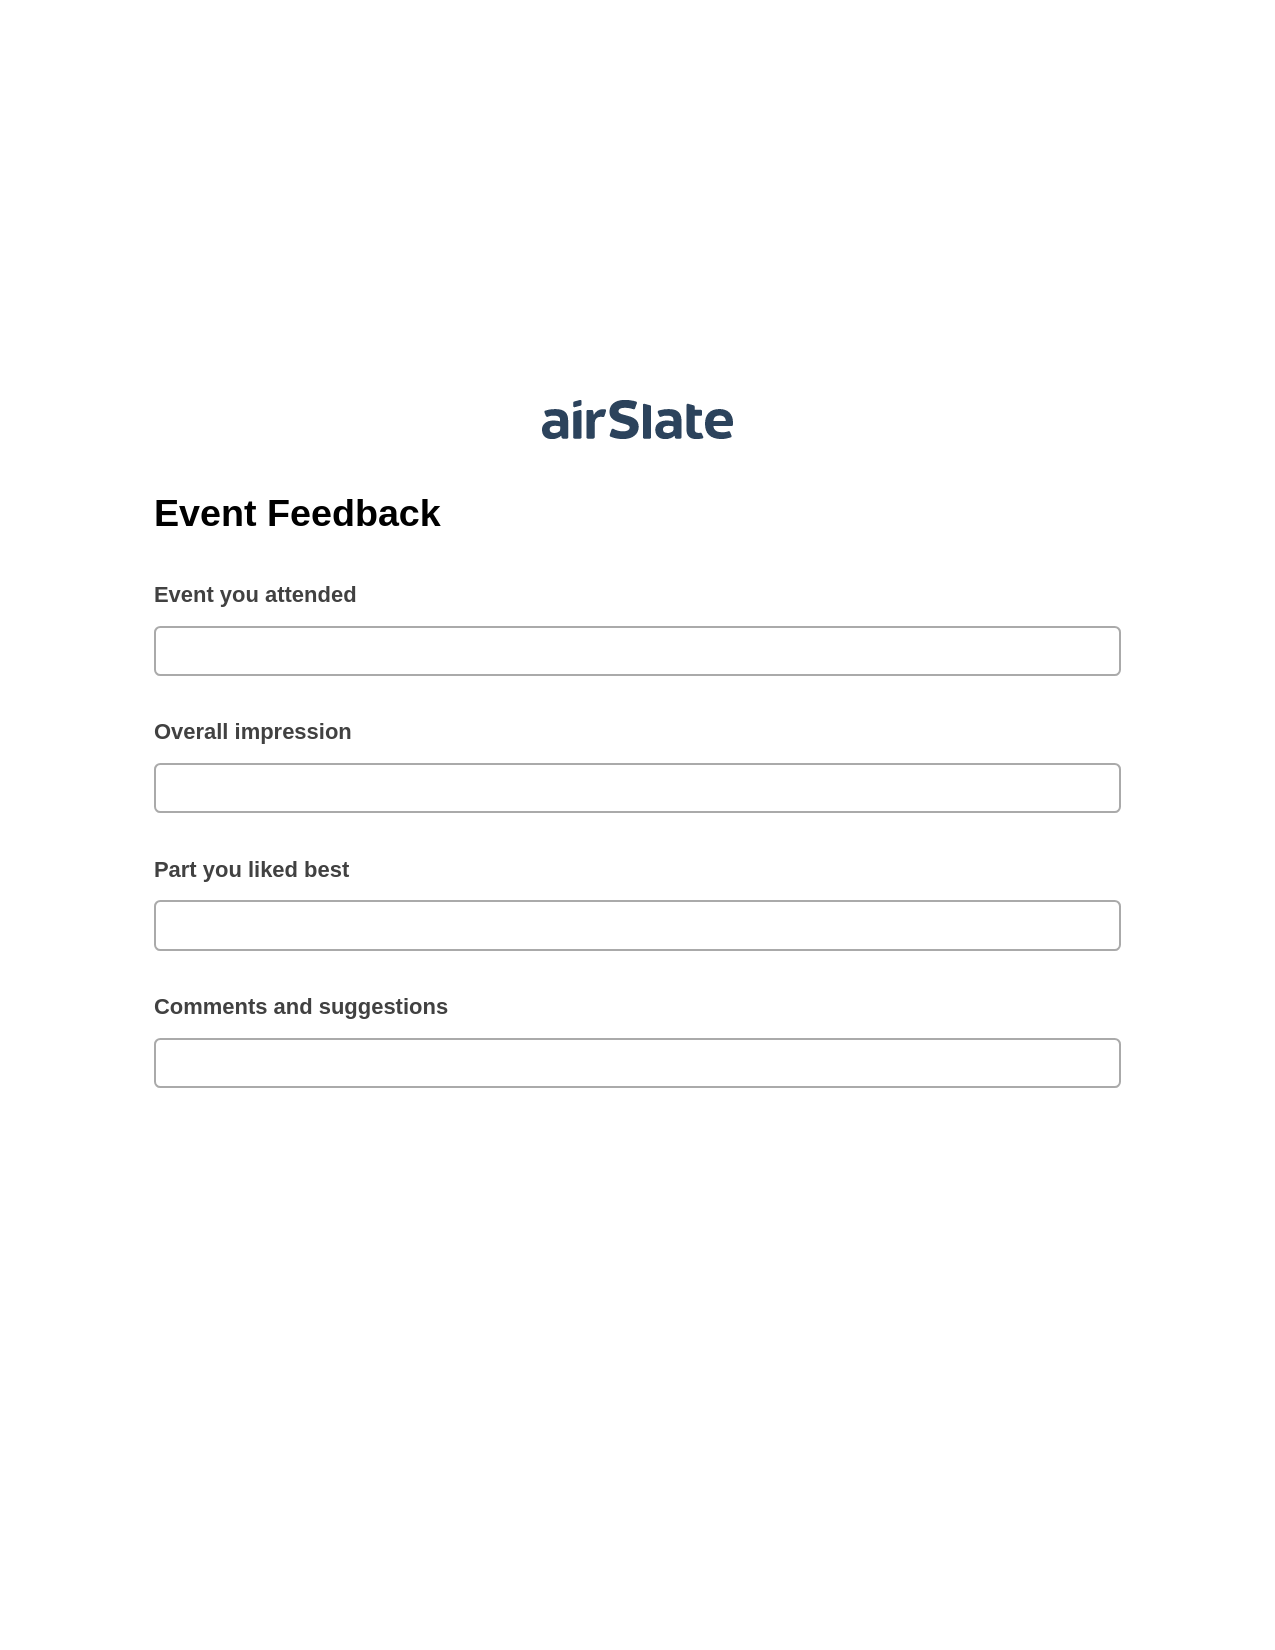 Event Feedback Pre-fill from NetSuite Records Bot, Audit Trail Bot, Export to Smartsheet